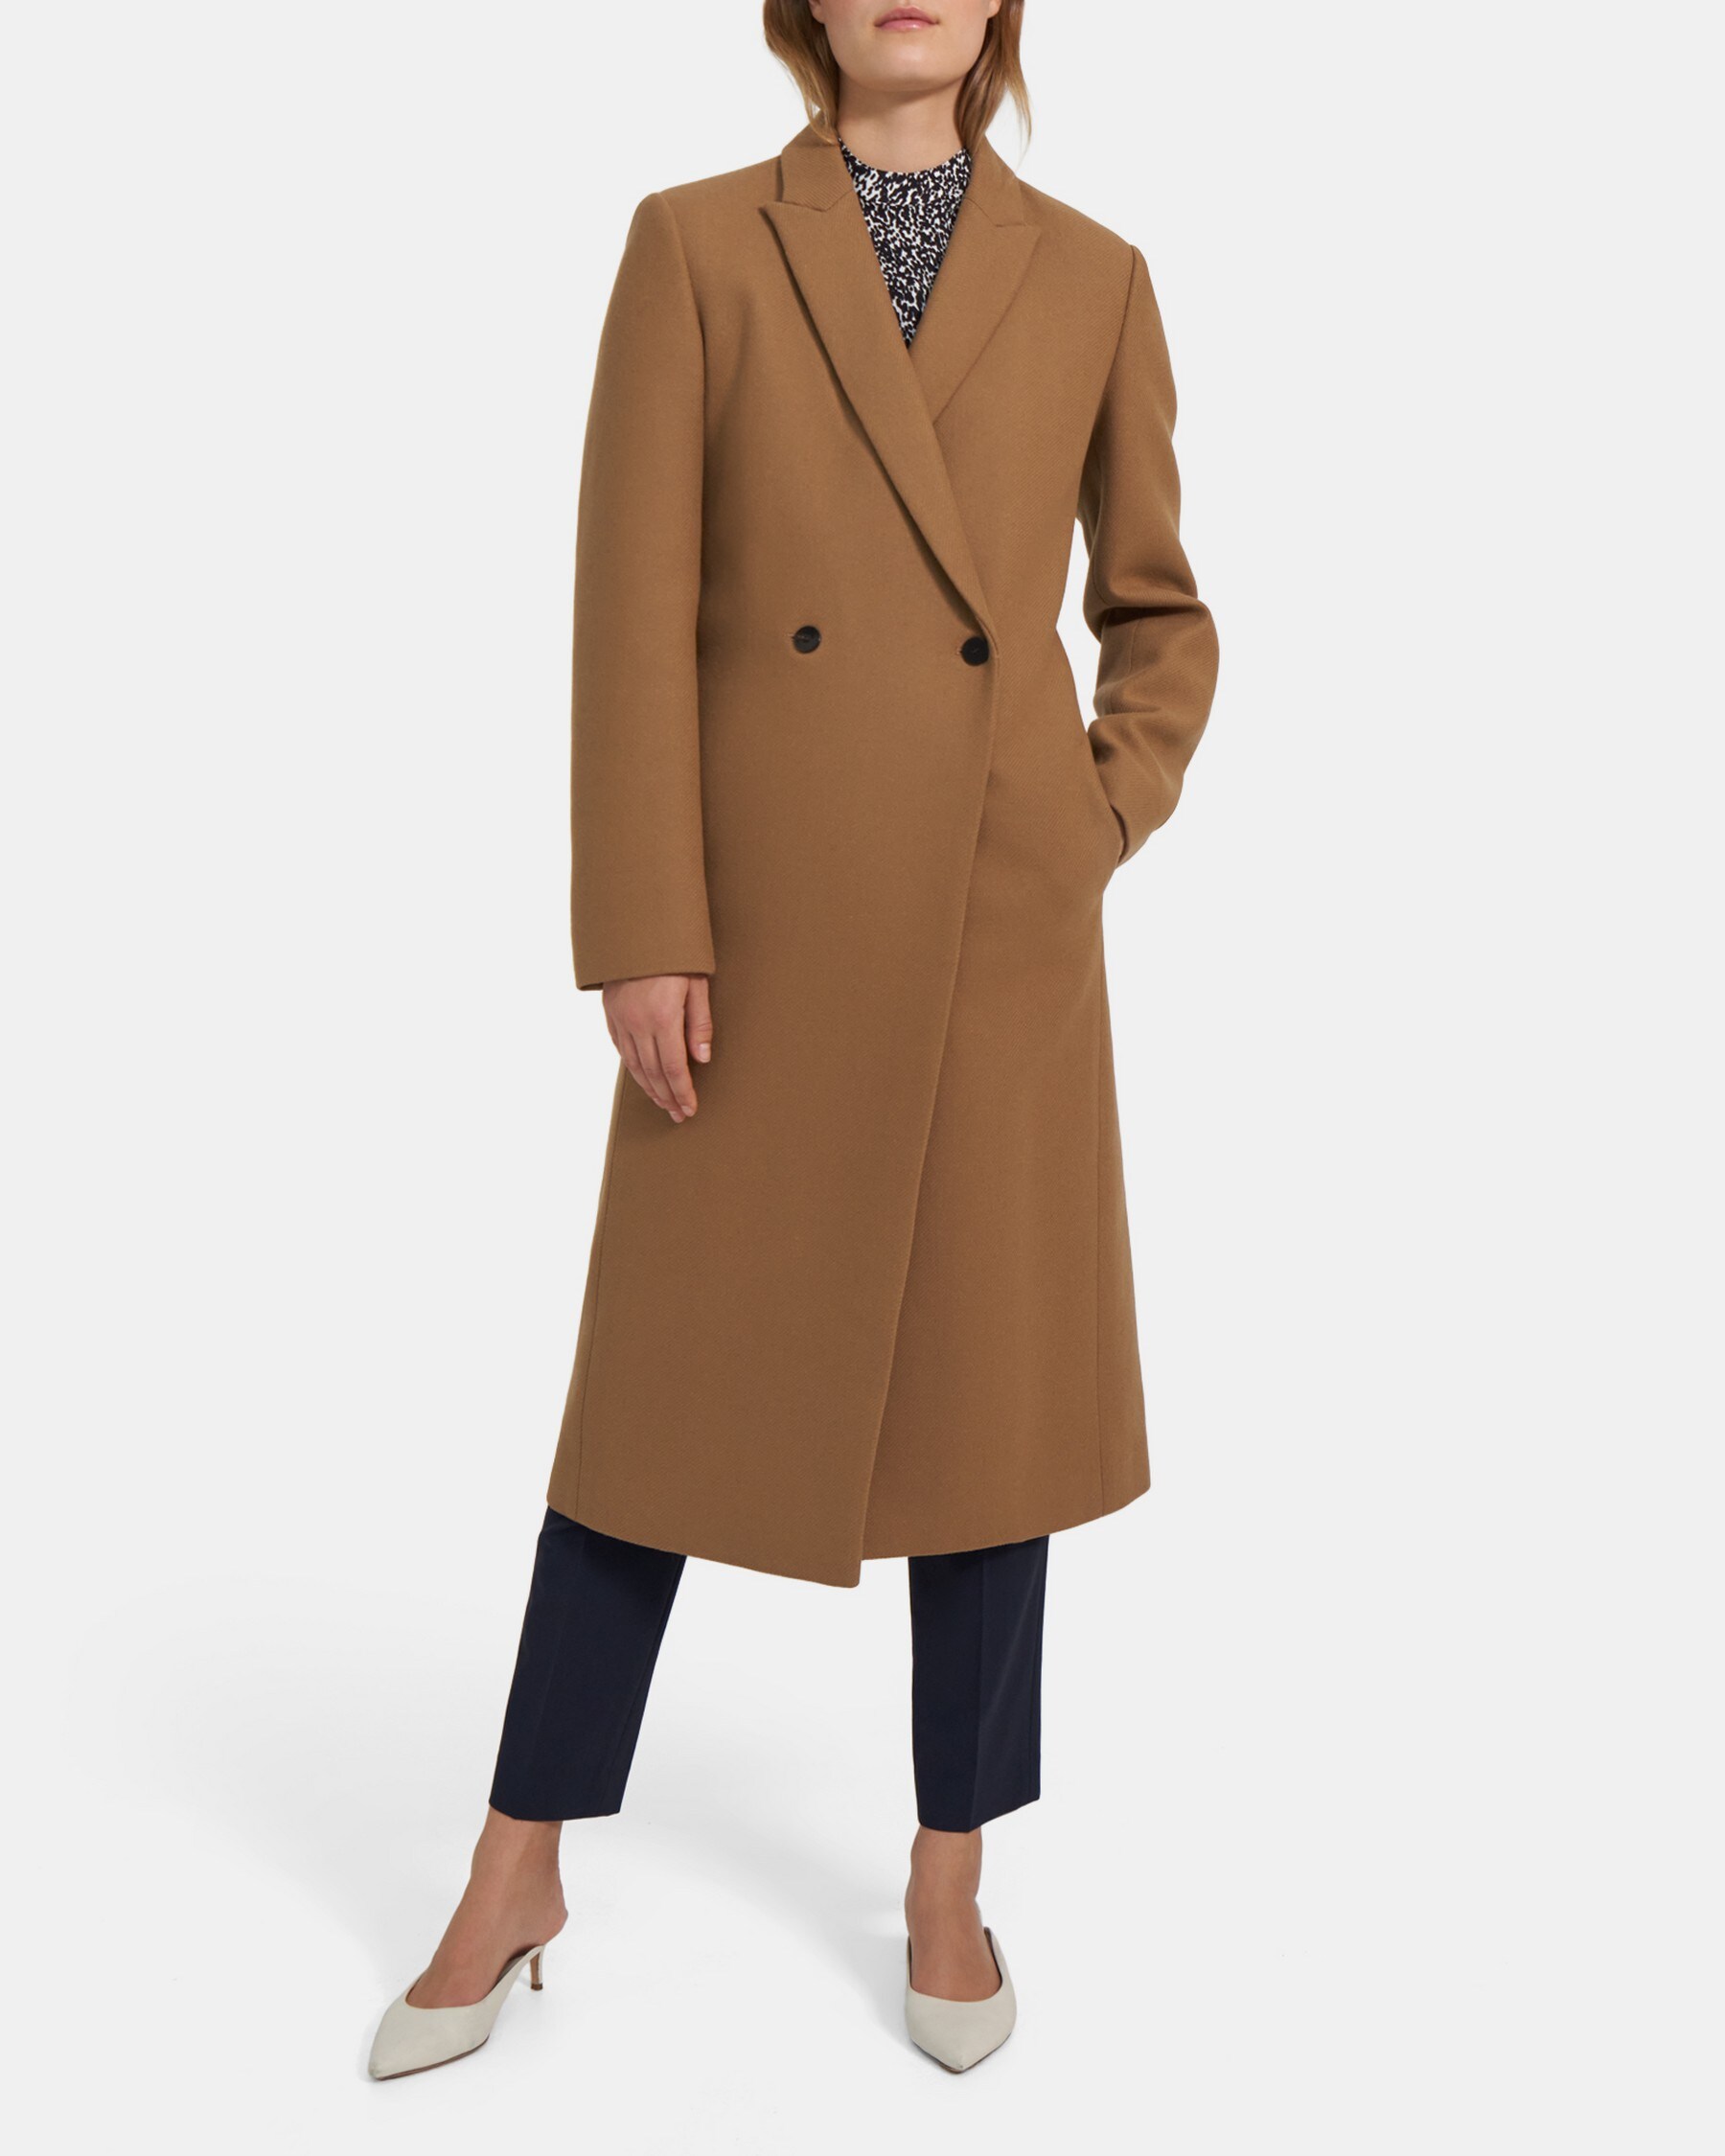 Theory City Coat in Wool Twill